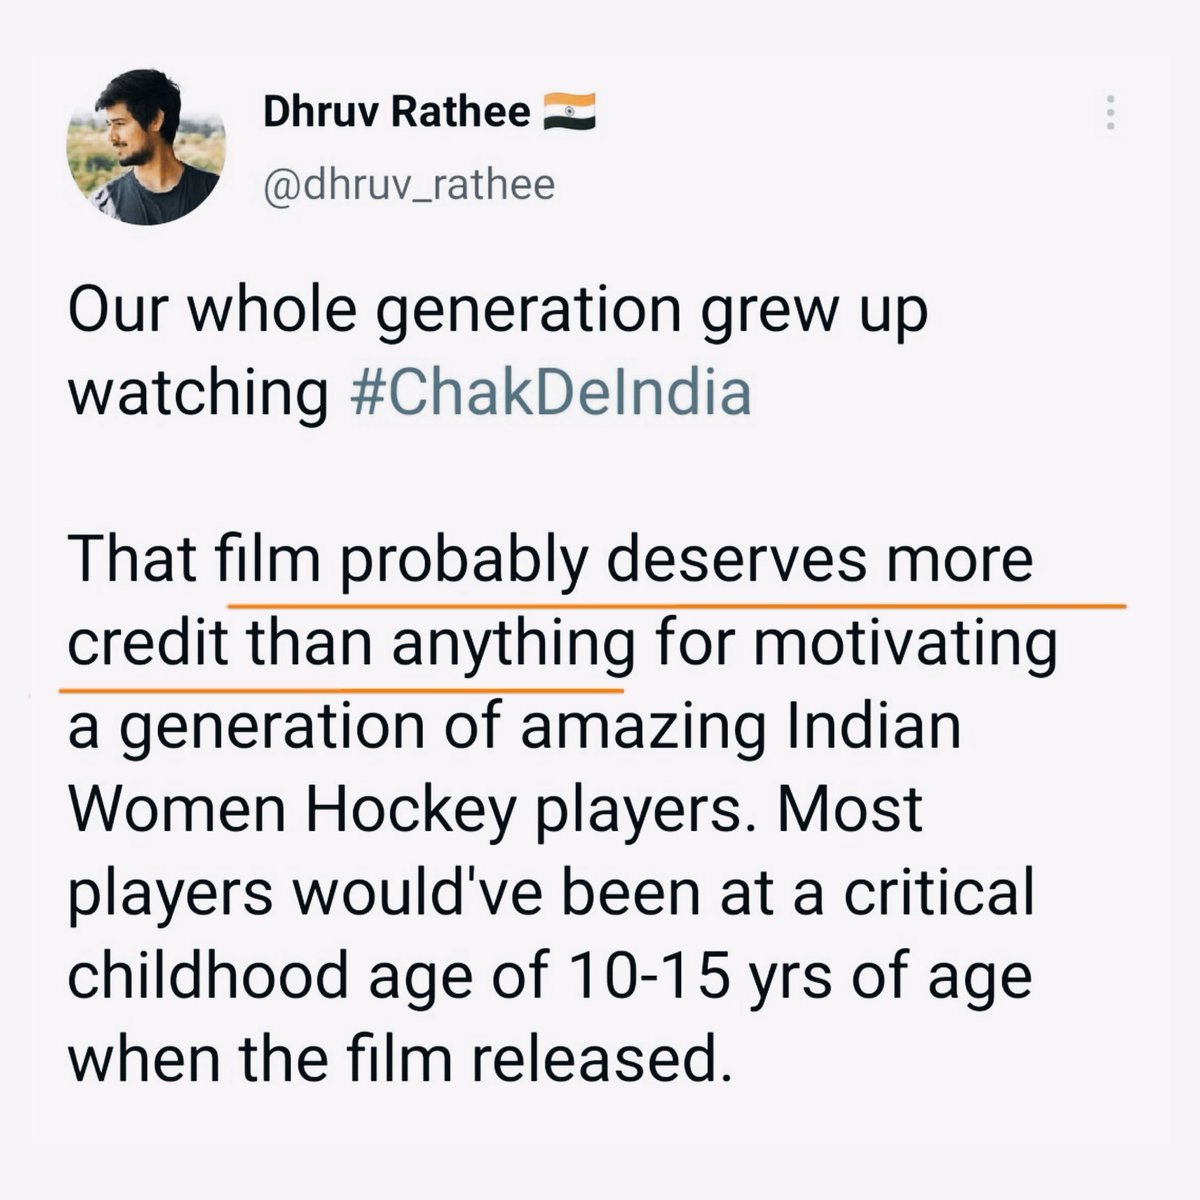 Our whole generation grew up watching Jeetendra and Leena Chandavarkar play badminton in 'Dhal gaya din, ho gayi shaam' song during Rangoli/Chitrahar/etc.

That song probably deserves more credit than anything for motivating amazing PV Sindhu to win two Olympic medals.